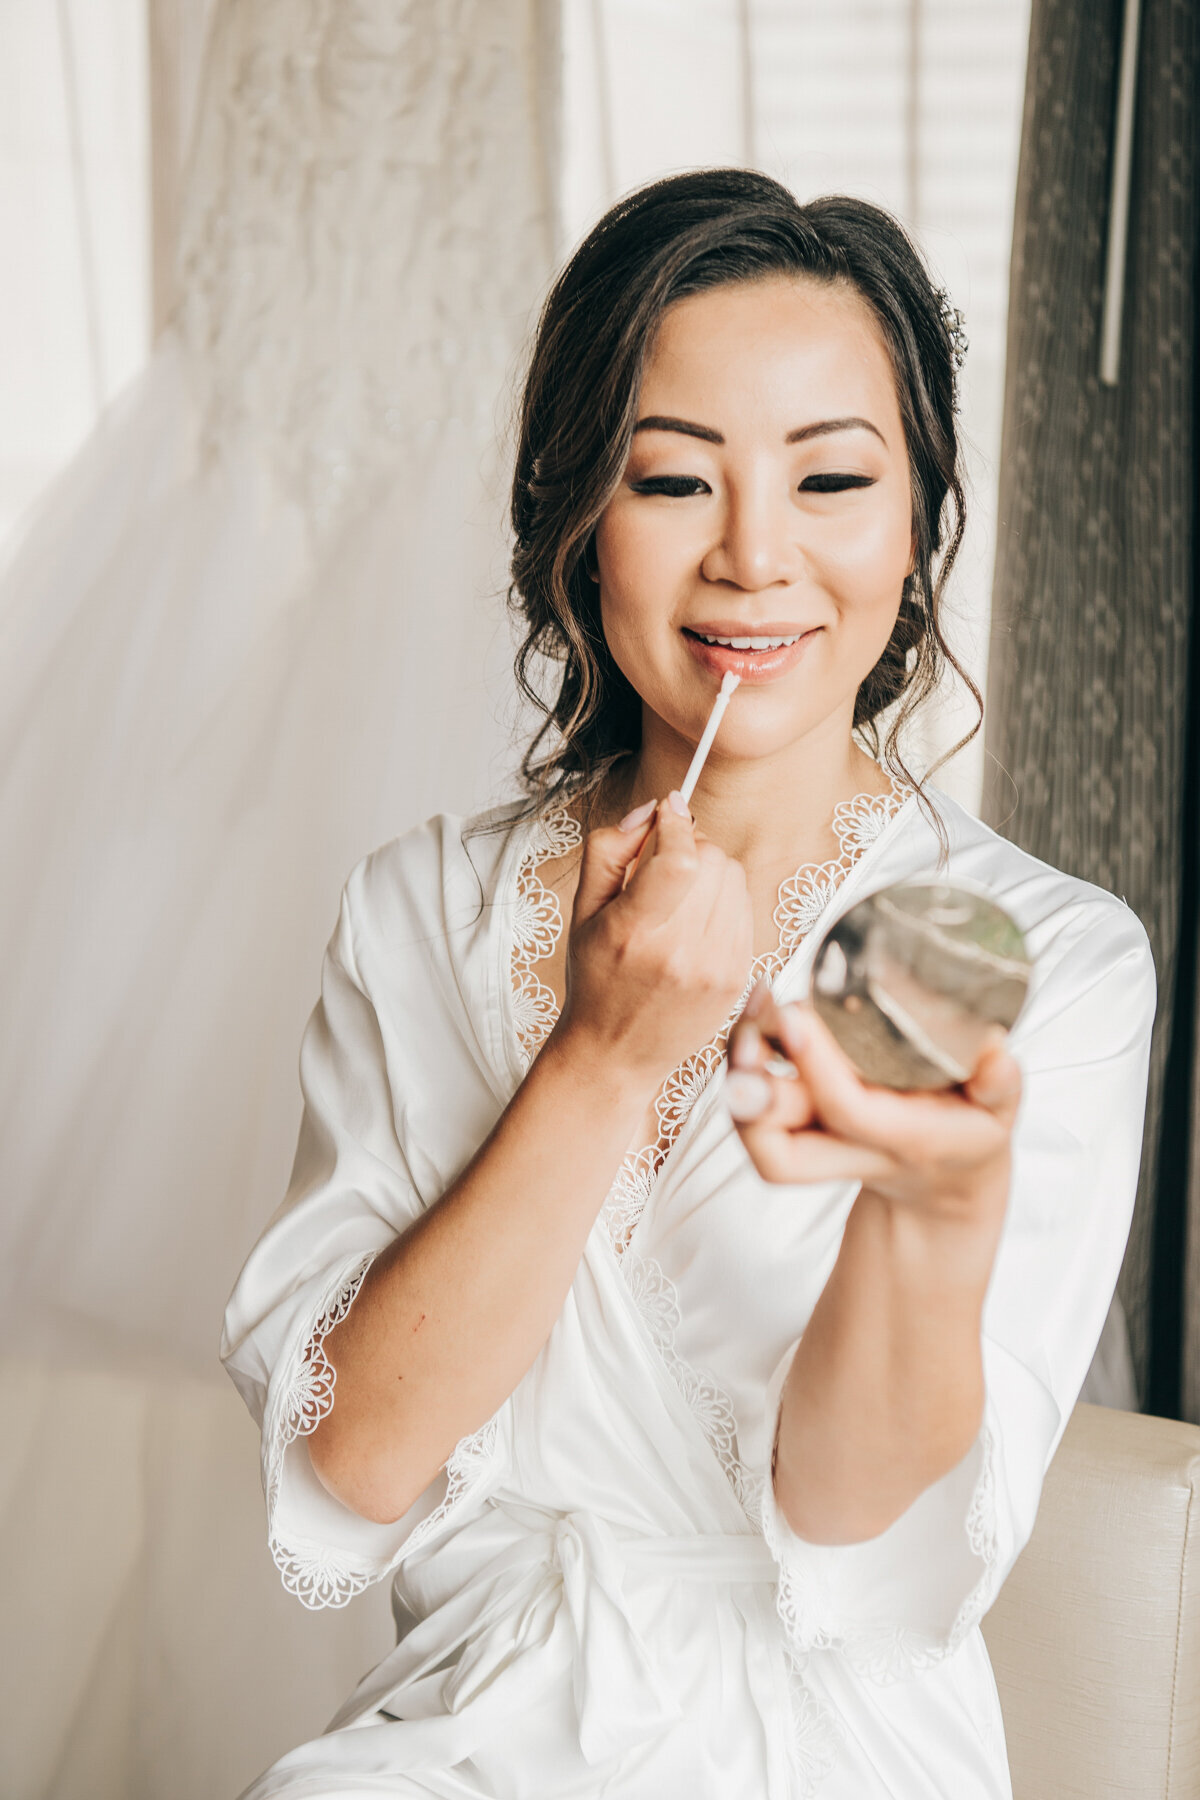 Gorgeous pictures of bride getting ready for luxurious wedding